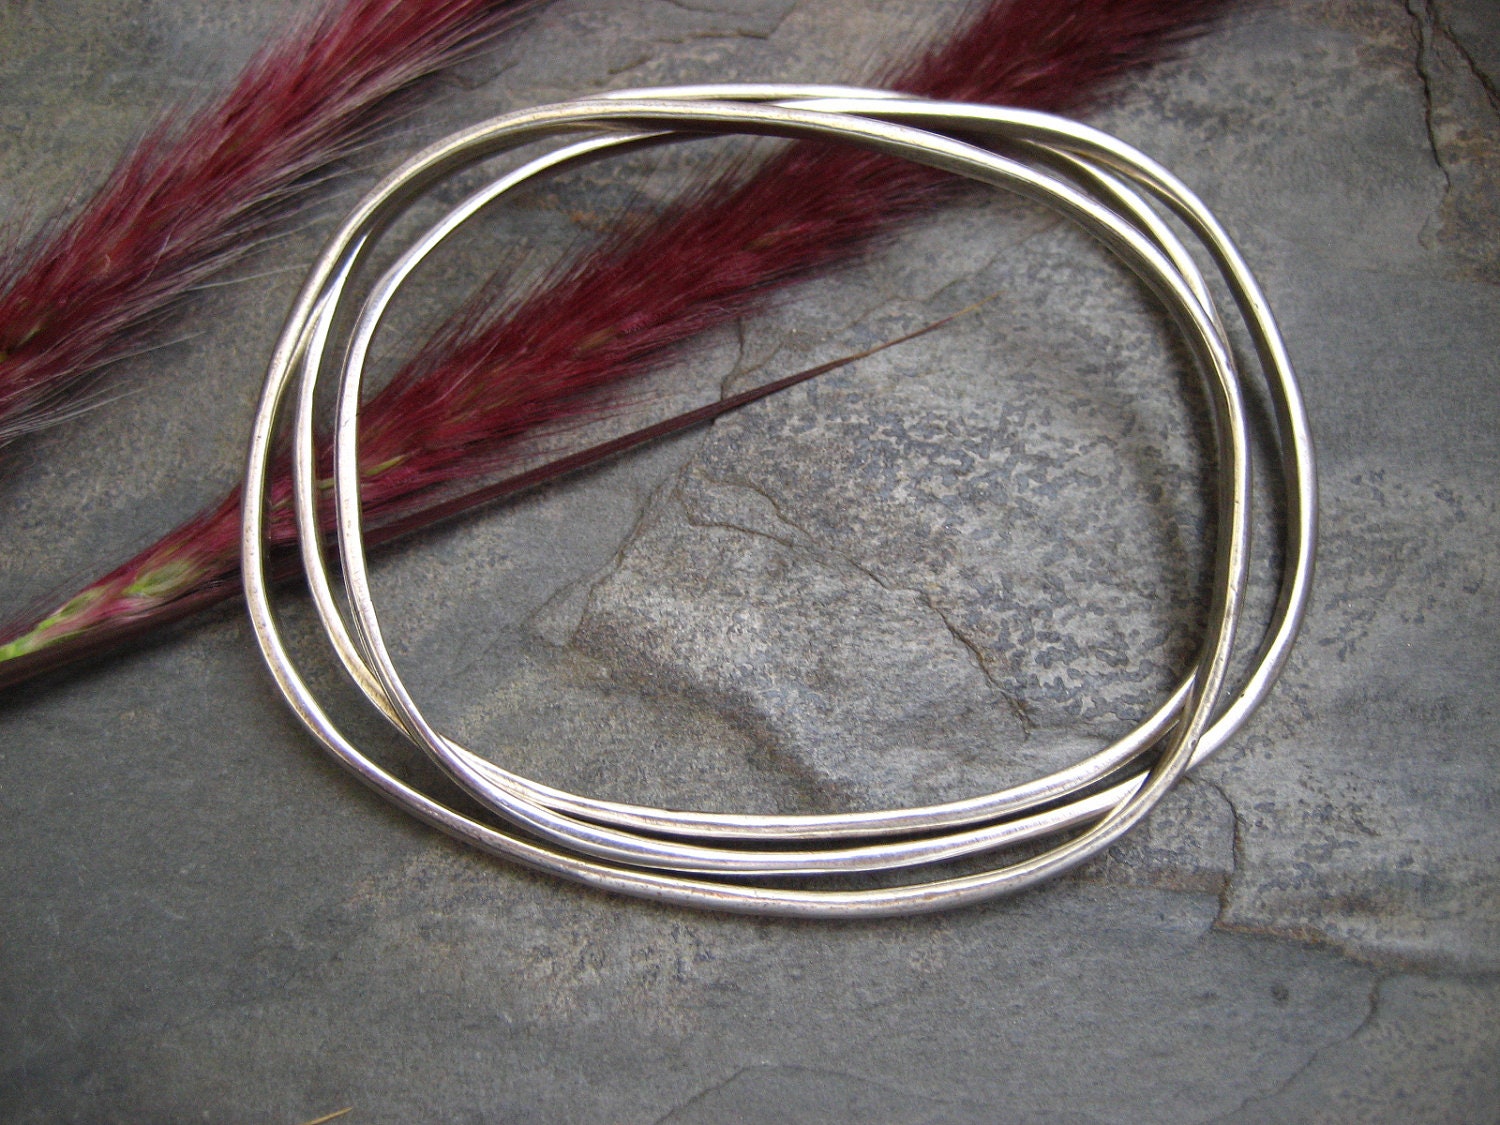 Oval silver bangles - sterling silver - heavy weight - set of 3 - ElfiRoose